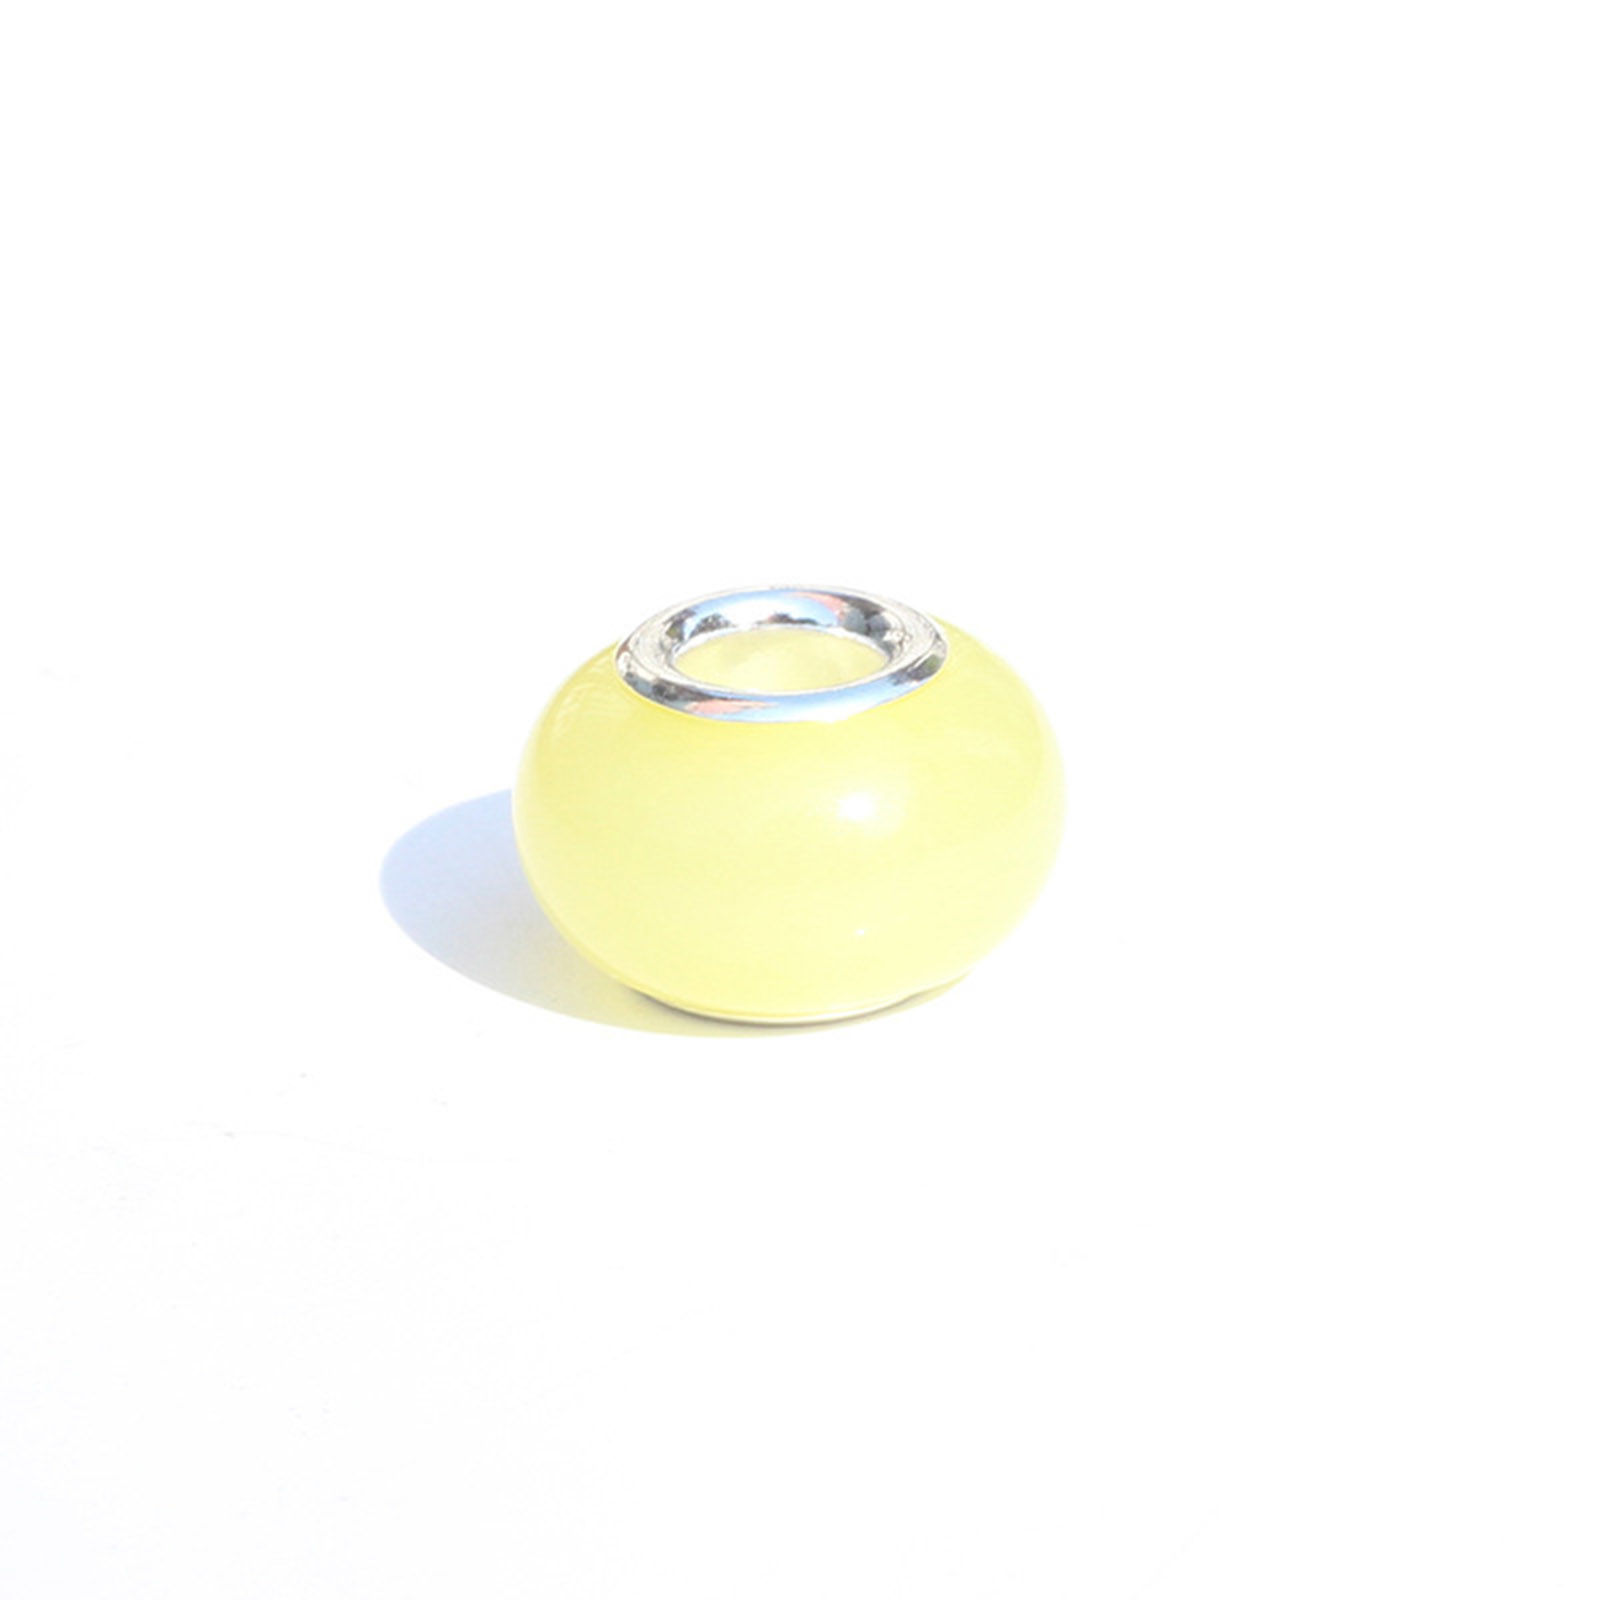 Picture of Resin European Style Large Hole Charm Beads Yellow Round Glow In The Dark Luminous 14mm x 9mm, Hole: Approx 5mm, 20 PCs